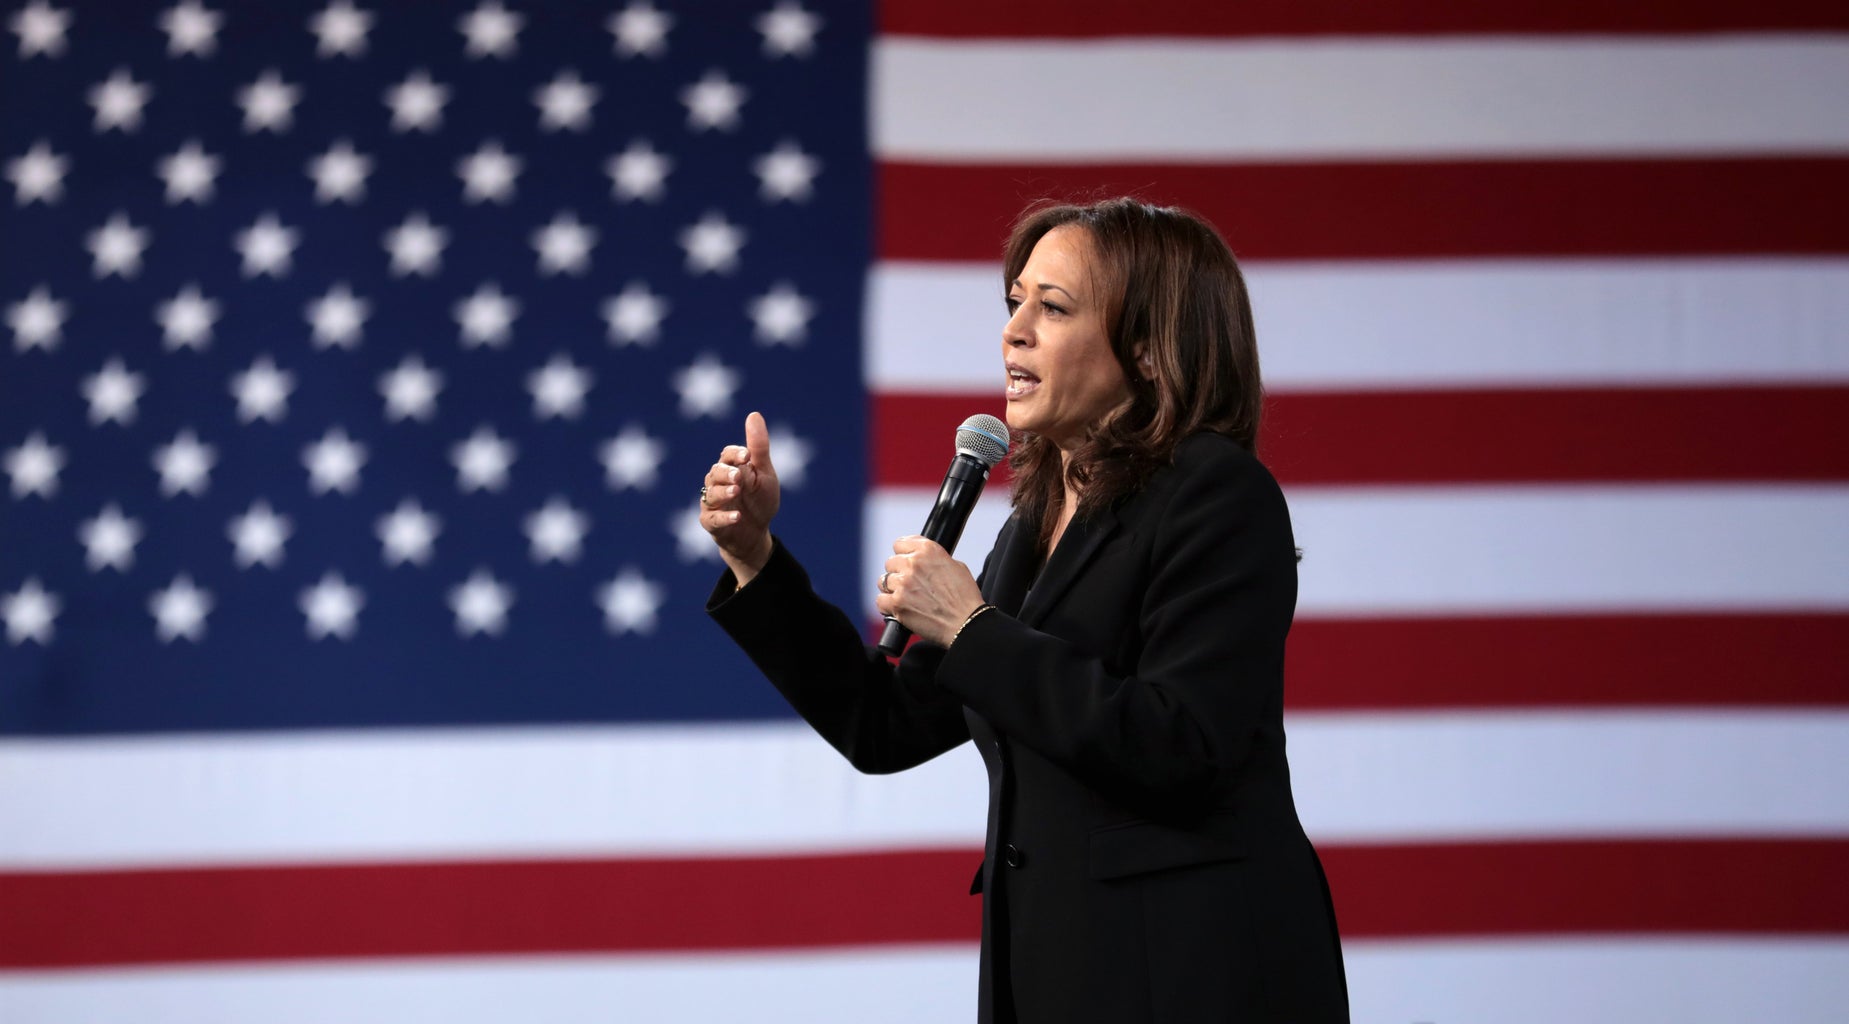 Kamala Harris speaking at an event in front of an American flag